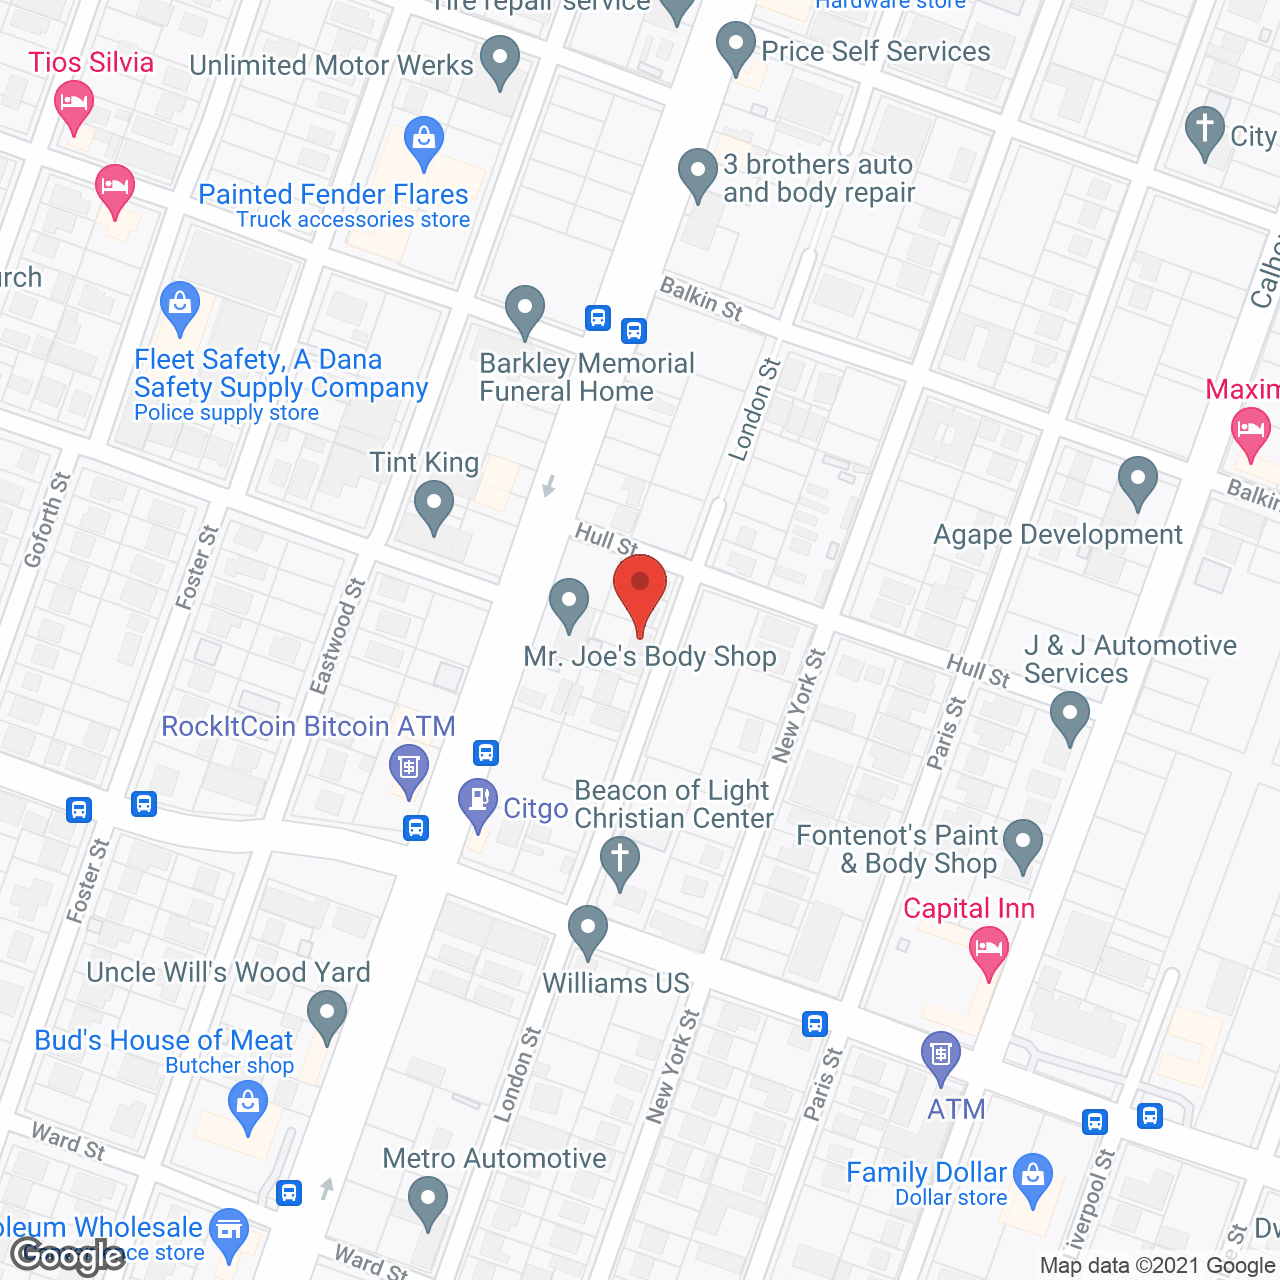 One London House in google map